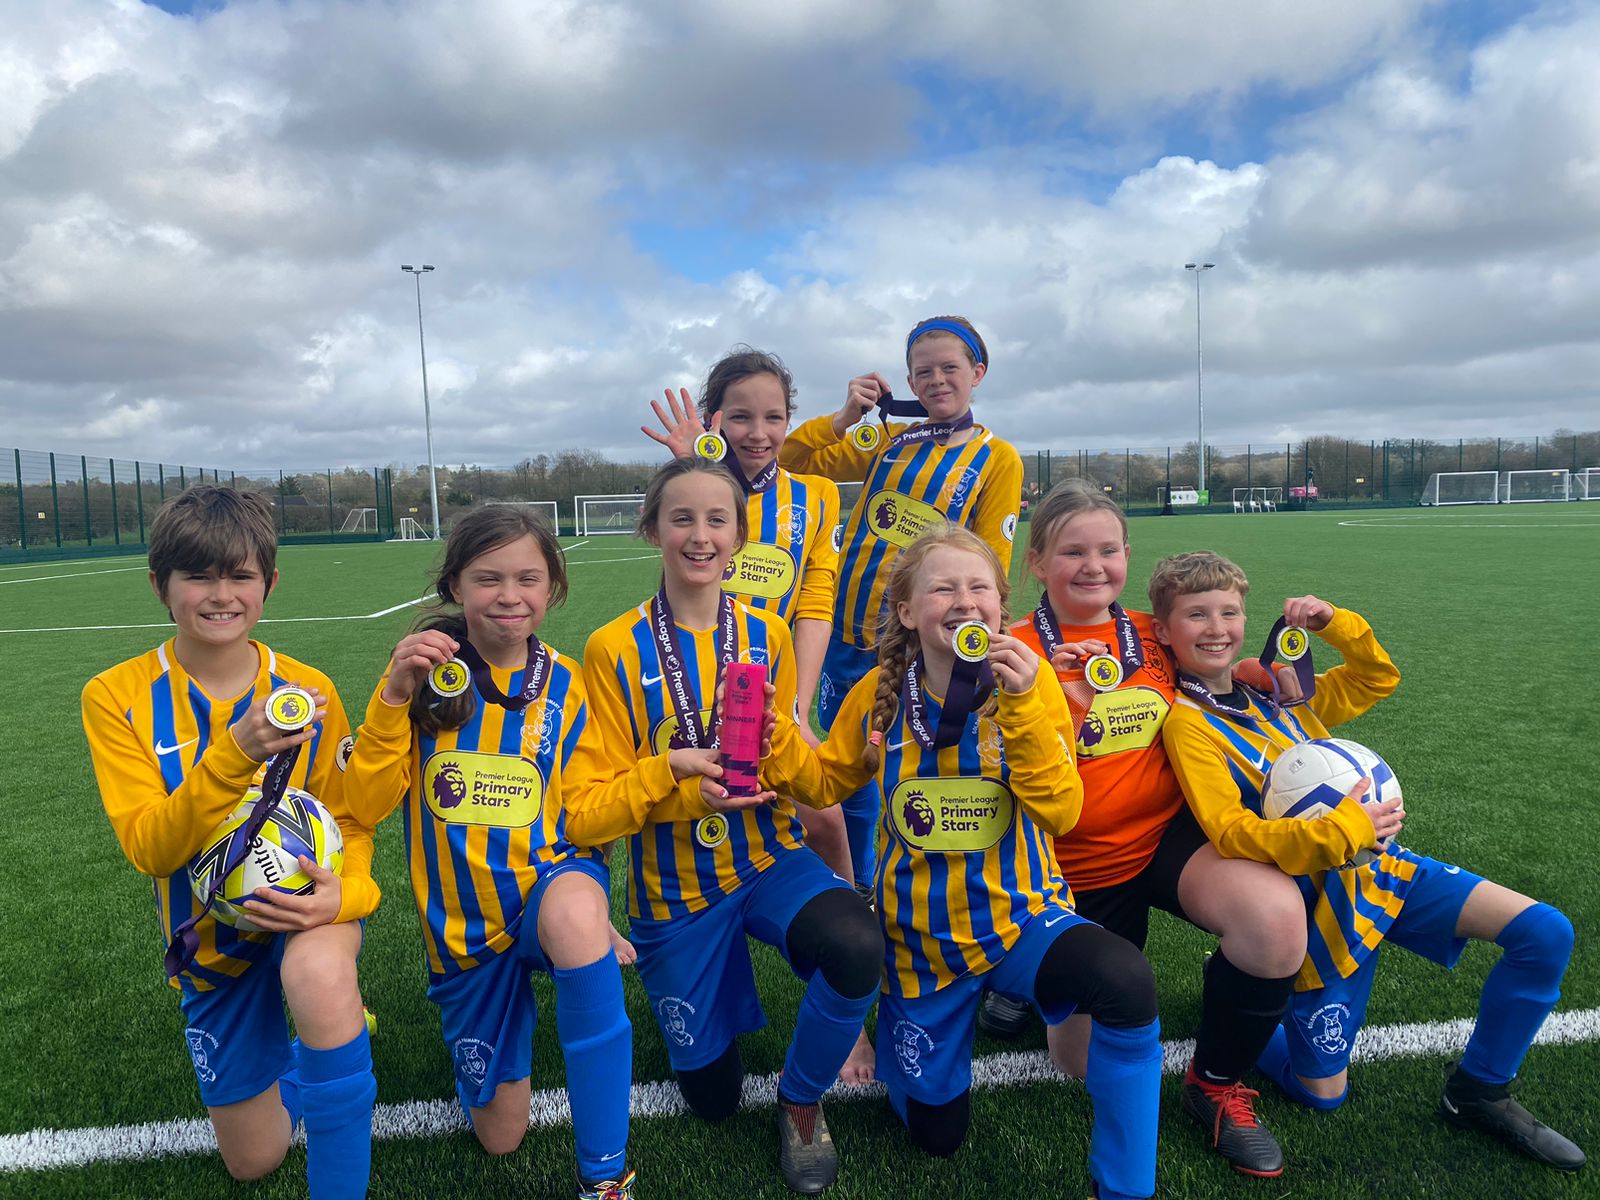 Goldstone Primary representing Albion at national Premier League tournament final